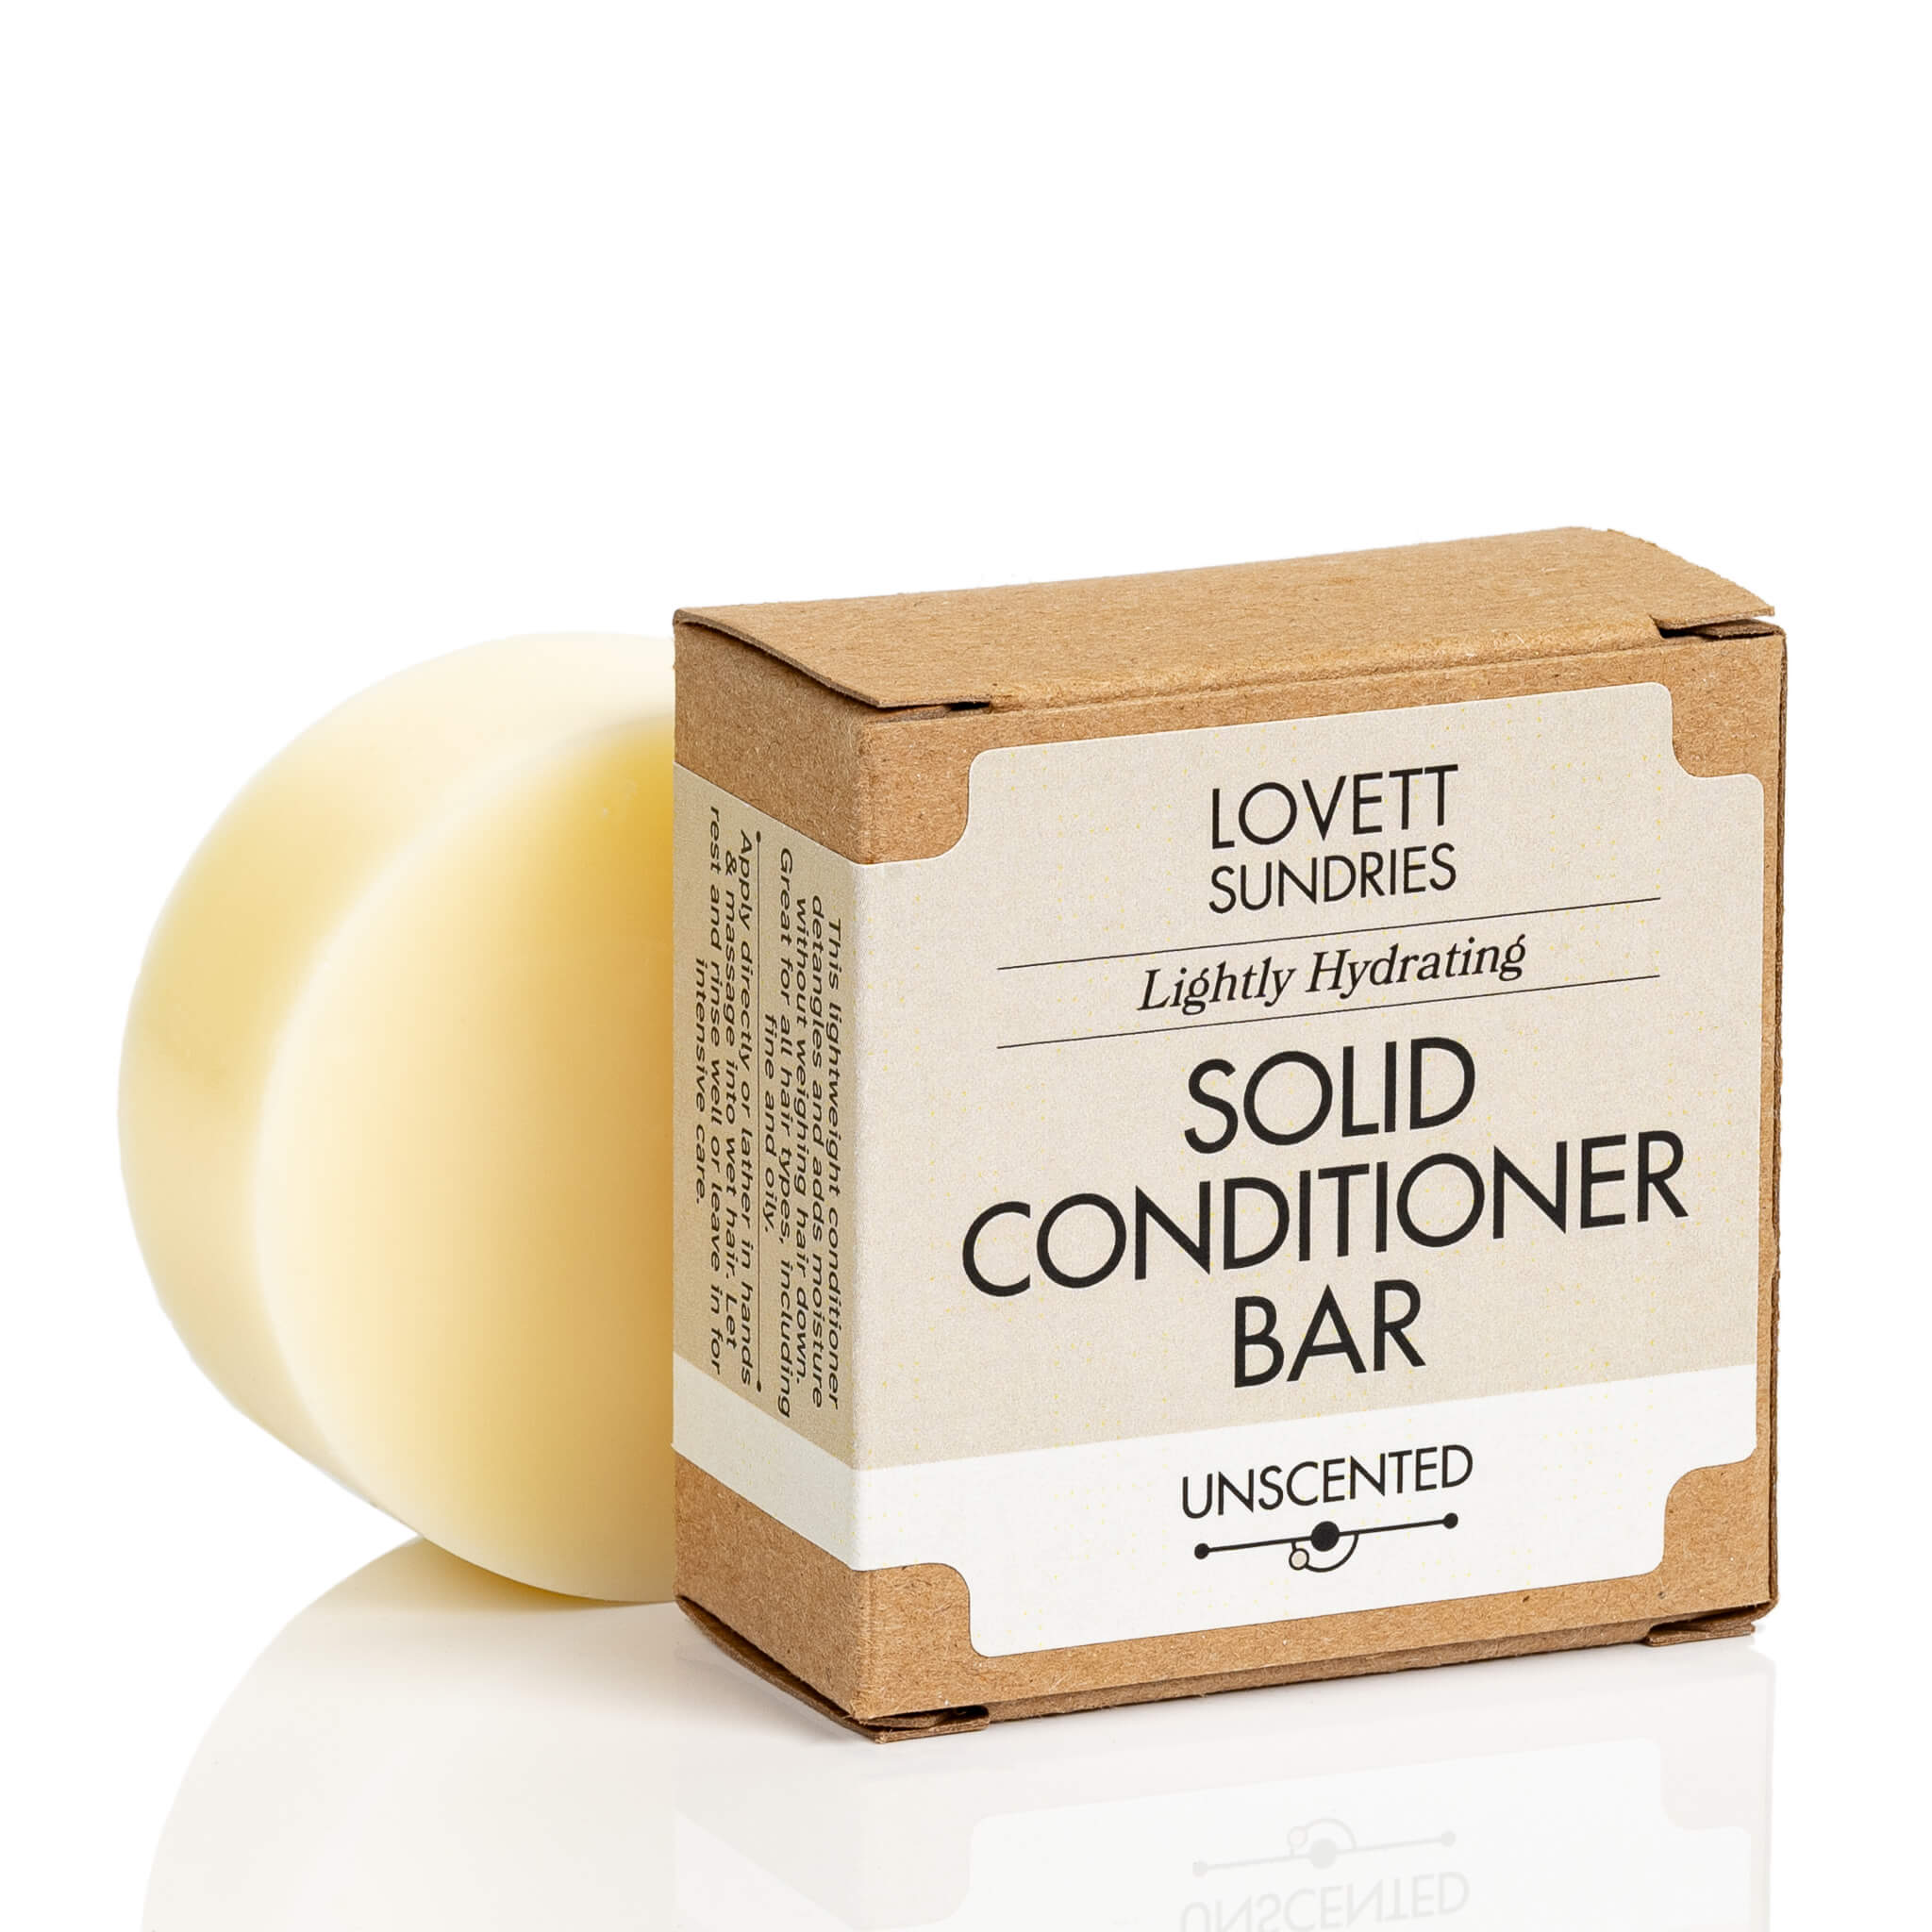 Unscented all natural lightly hydrating solid conditioner bar in a recyclable paper box. 